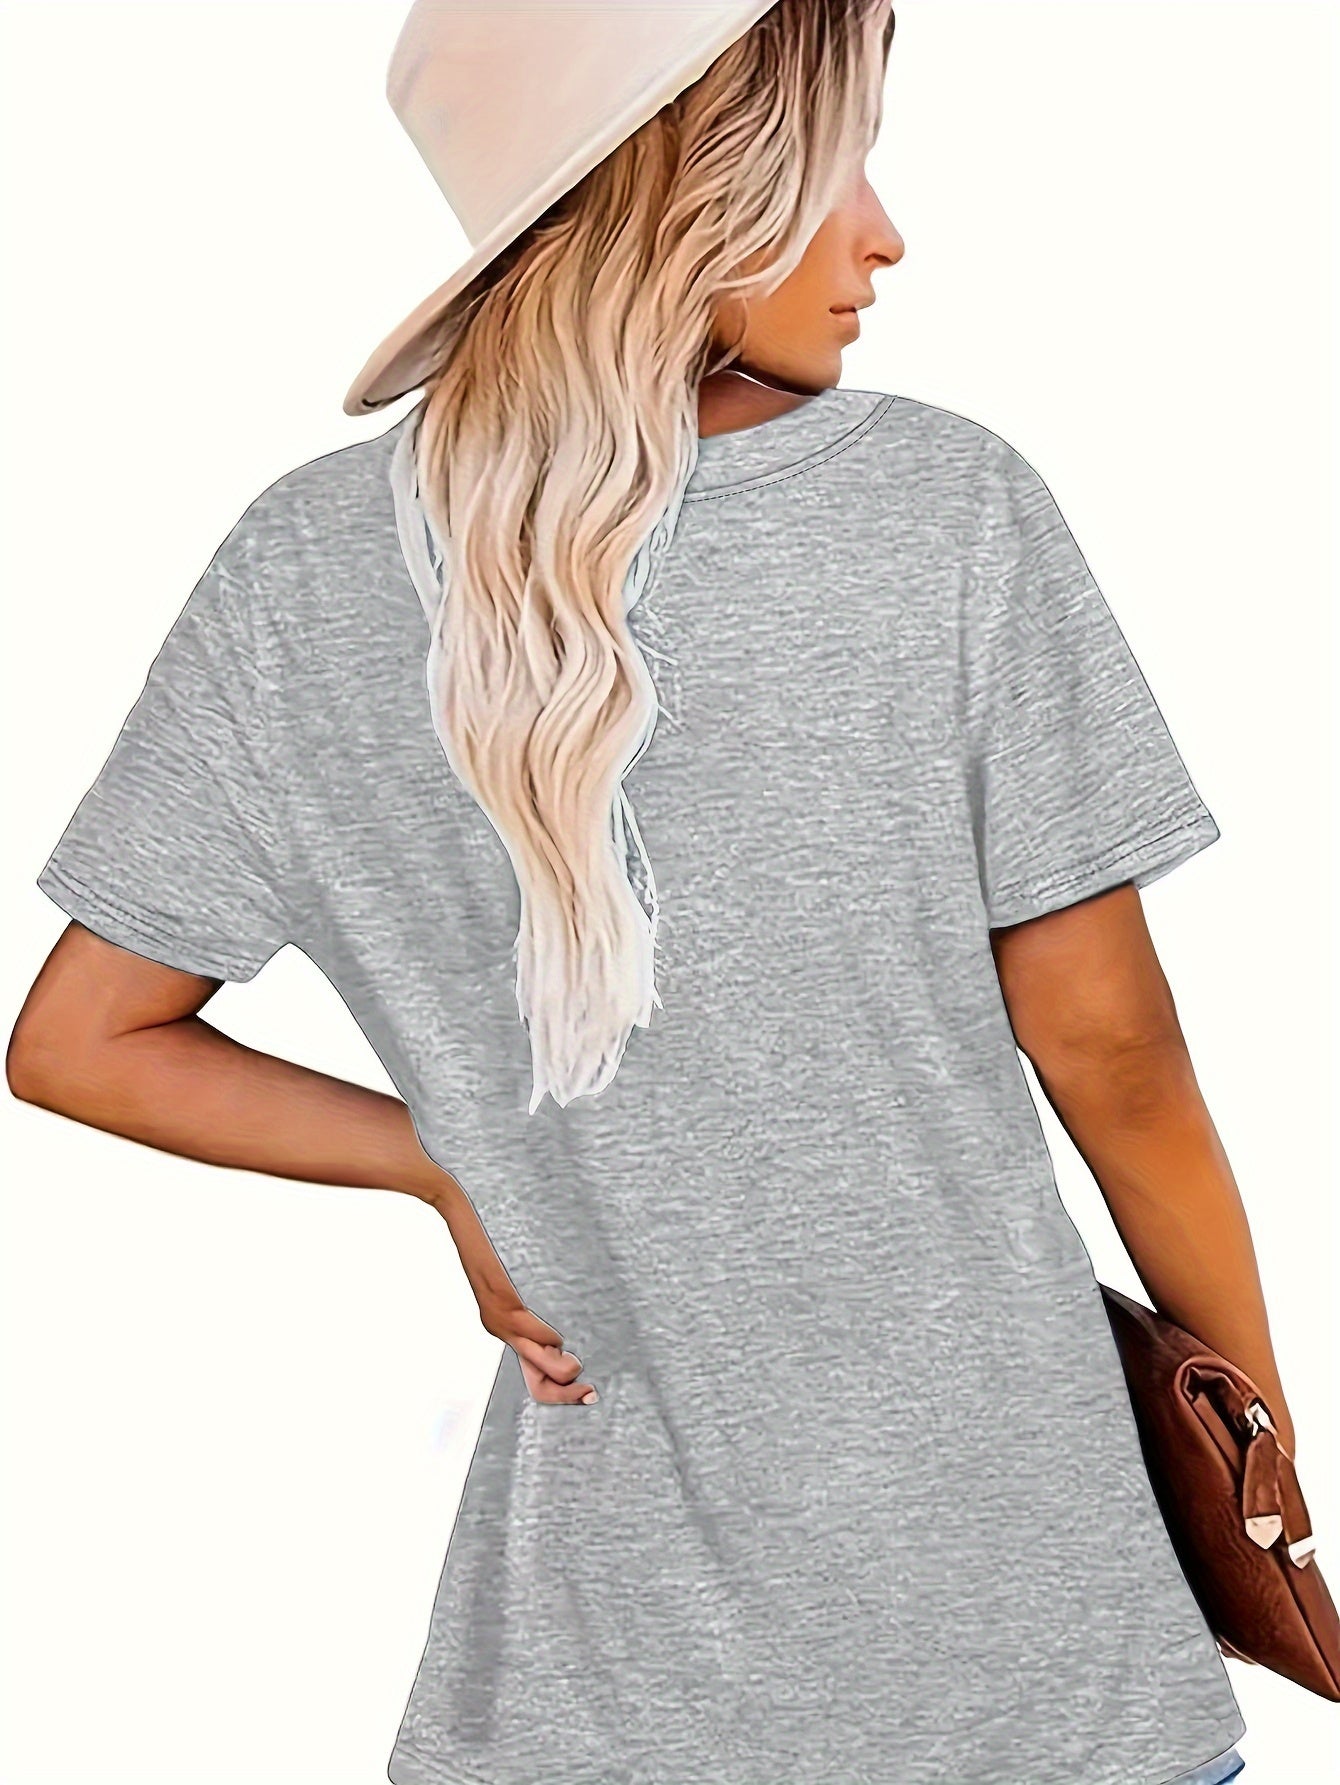 Guitar Print Crew Neck T-shirt, Casual Short Sleeve Top For Spring & Summer, Women's Clothing